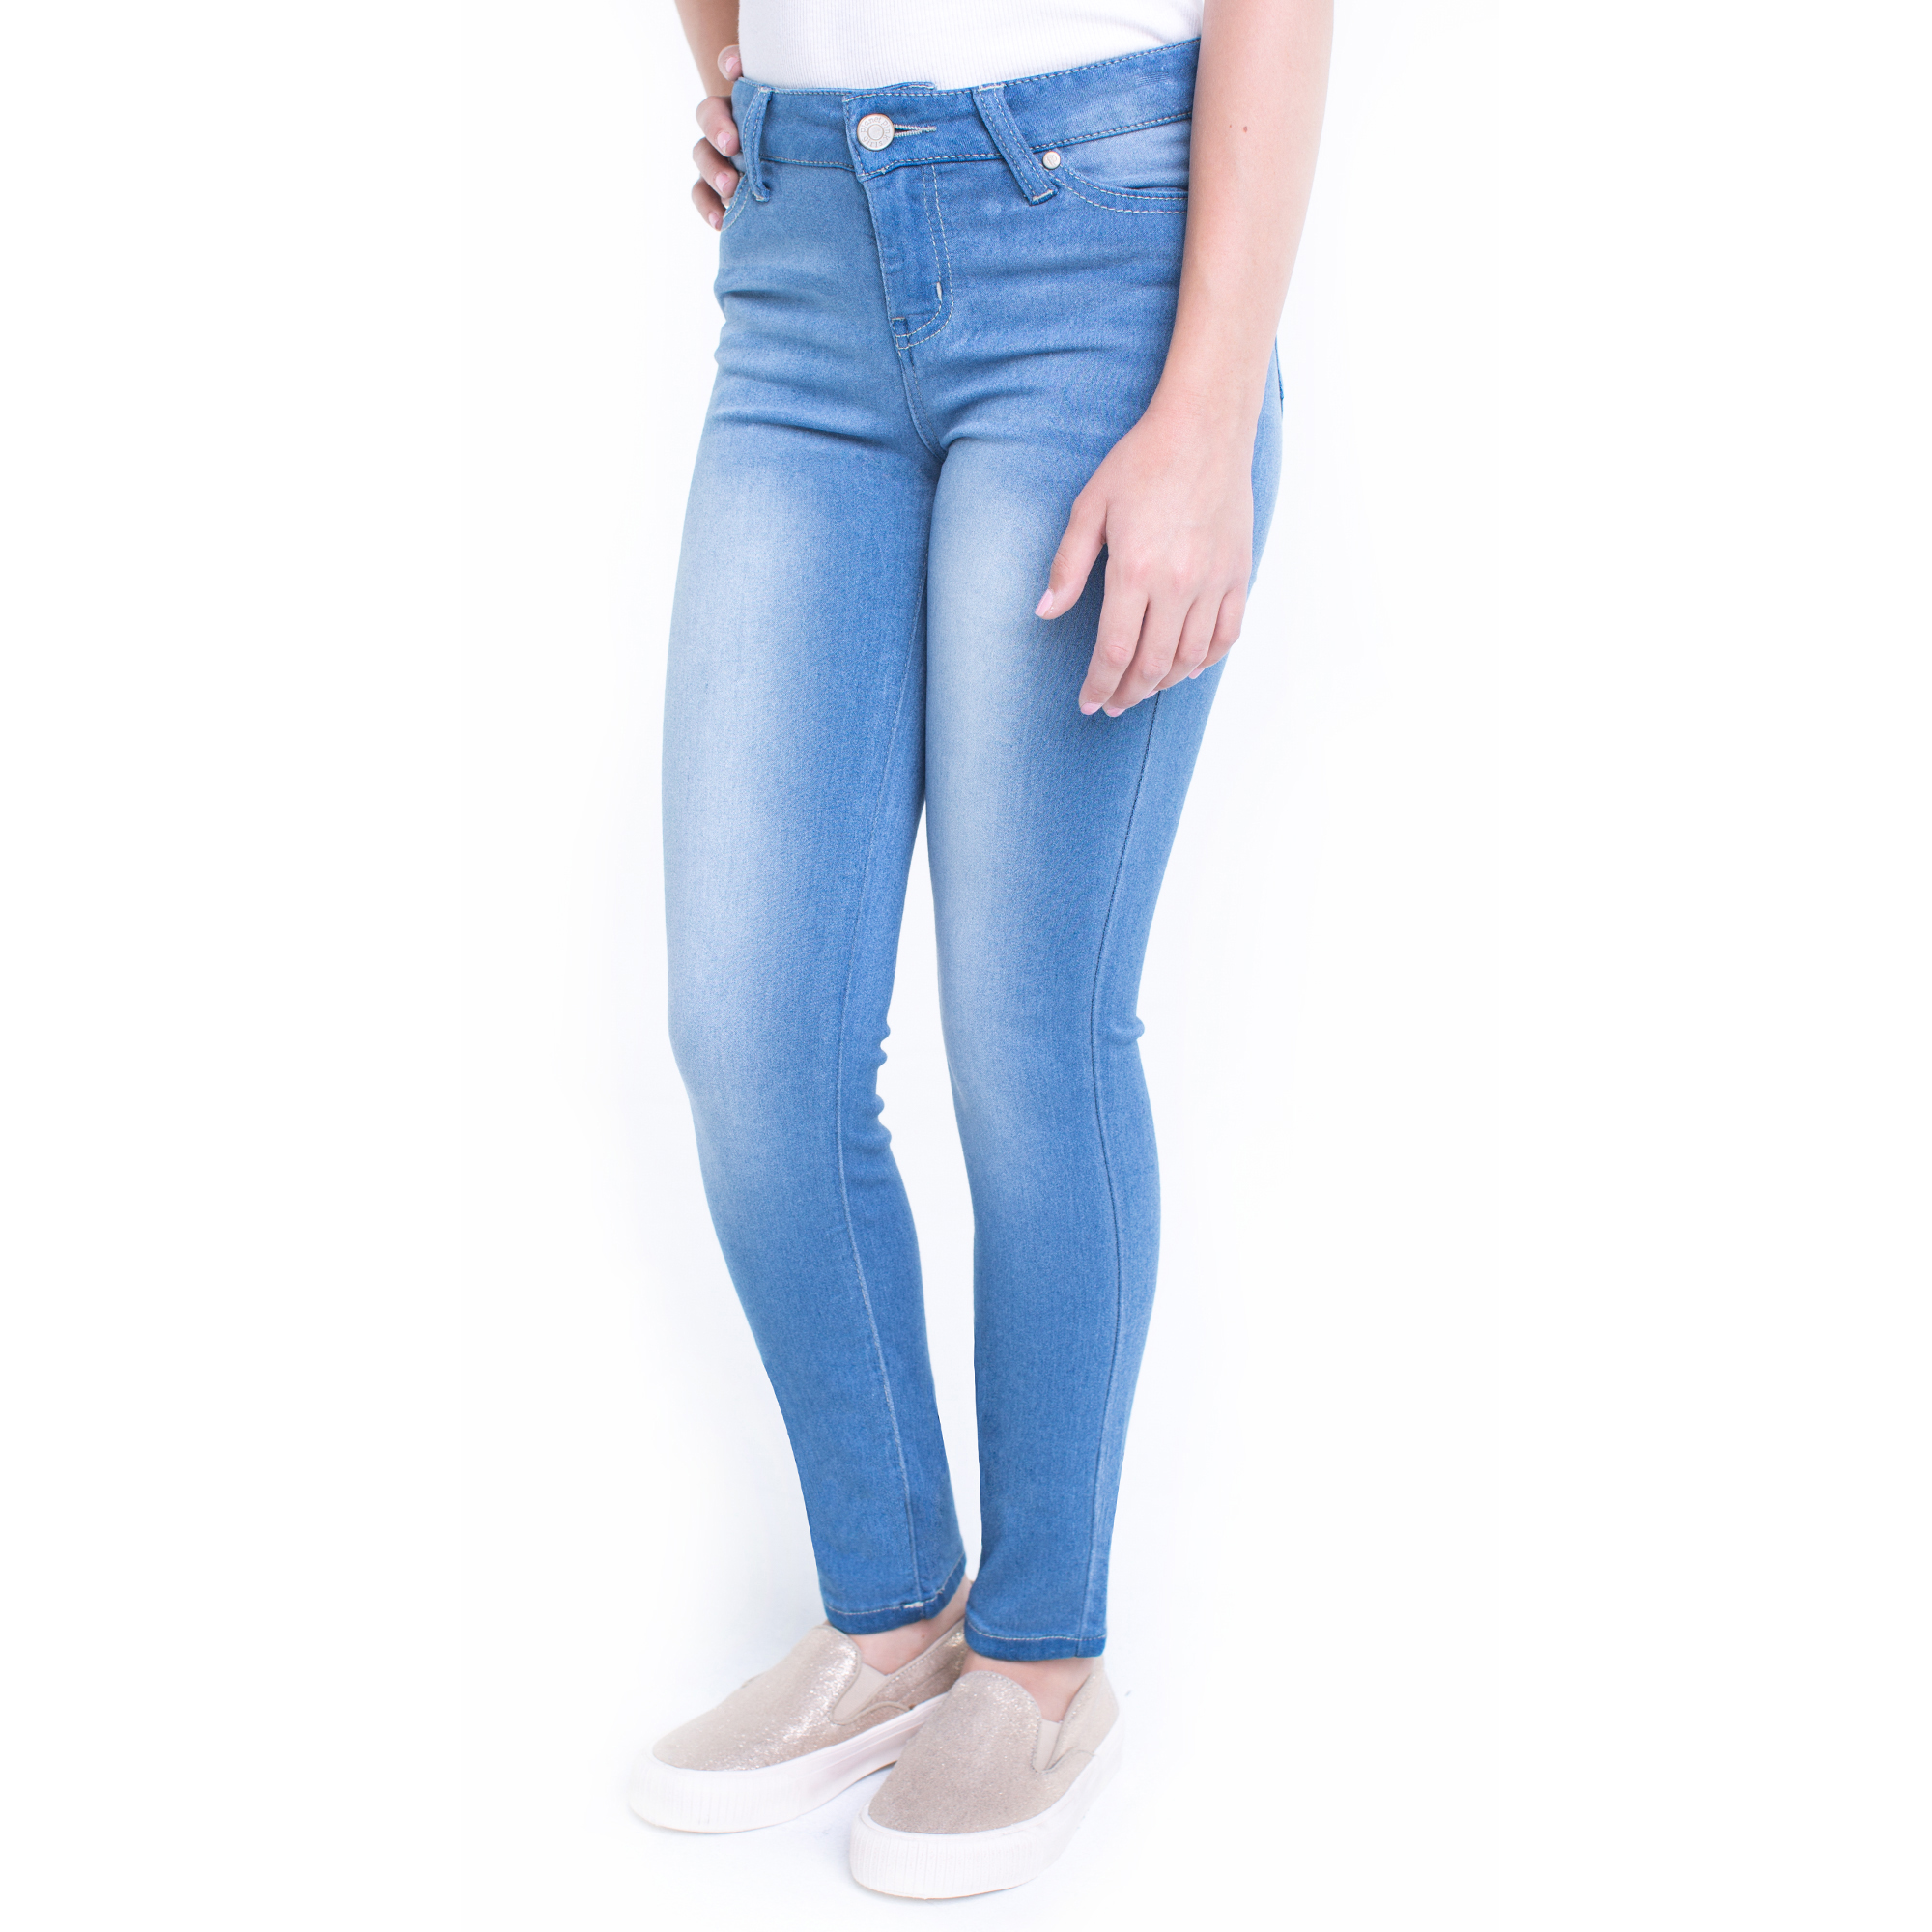 Planet Pink Girls Super Soft Skinny Jeans, Sizes 6-16 - image 1 of 2